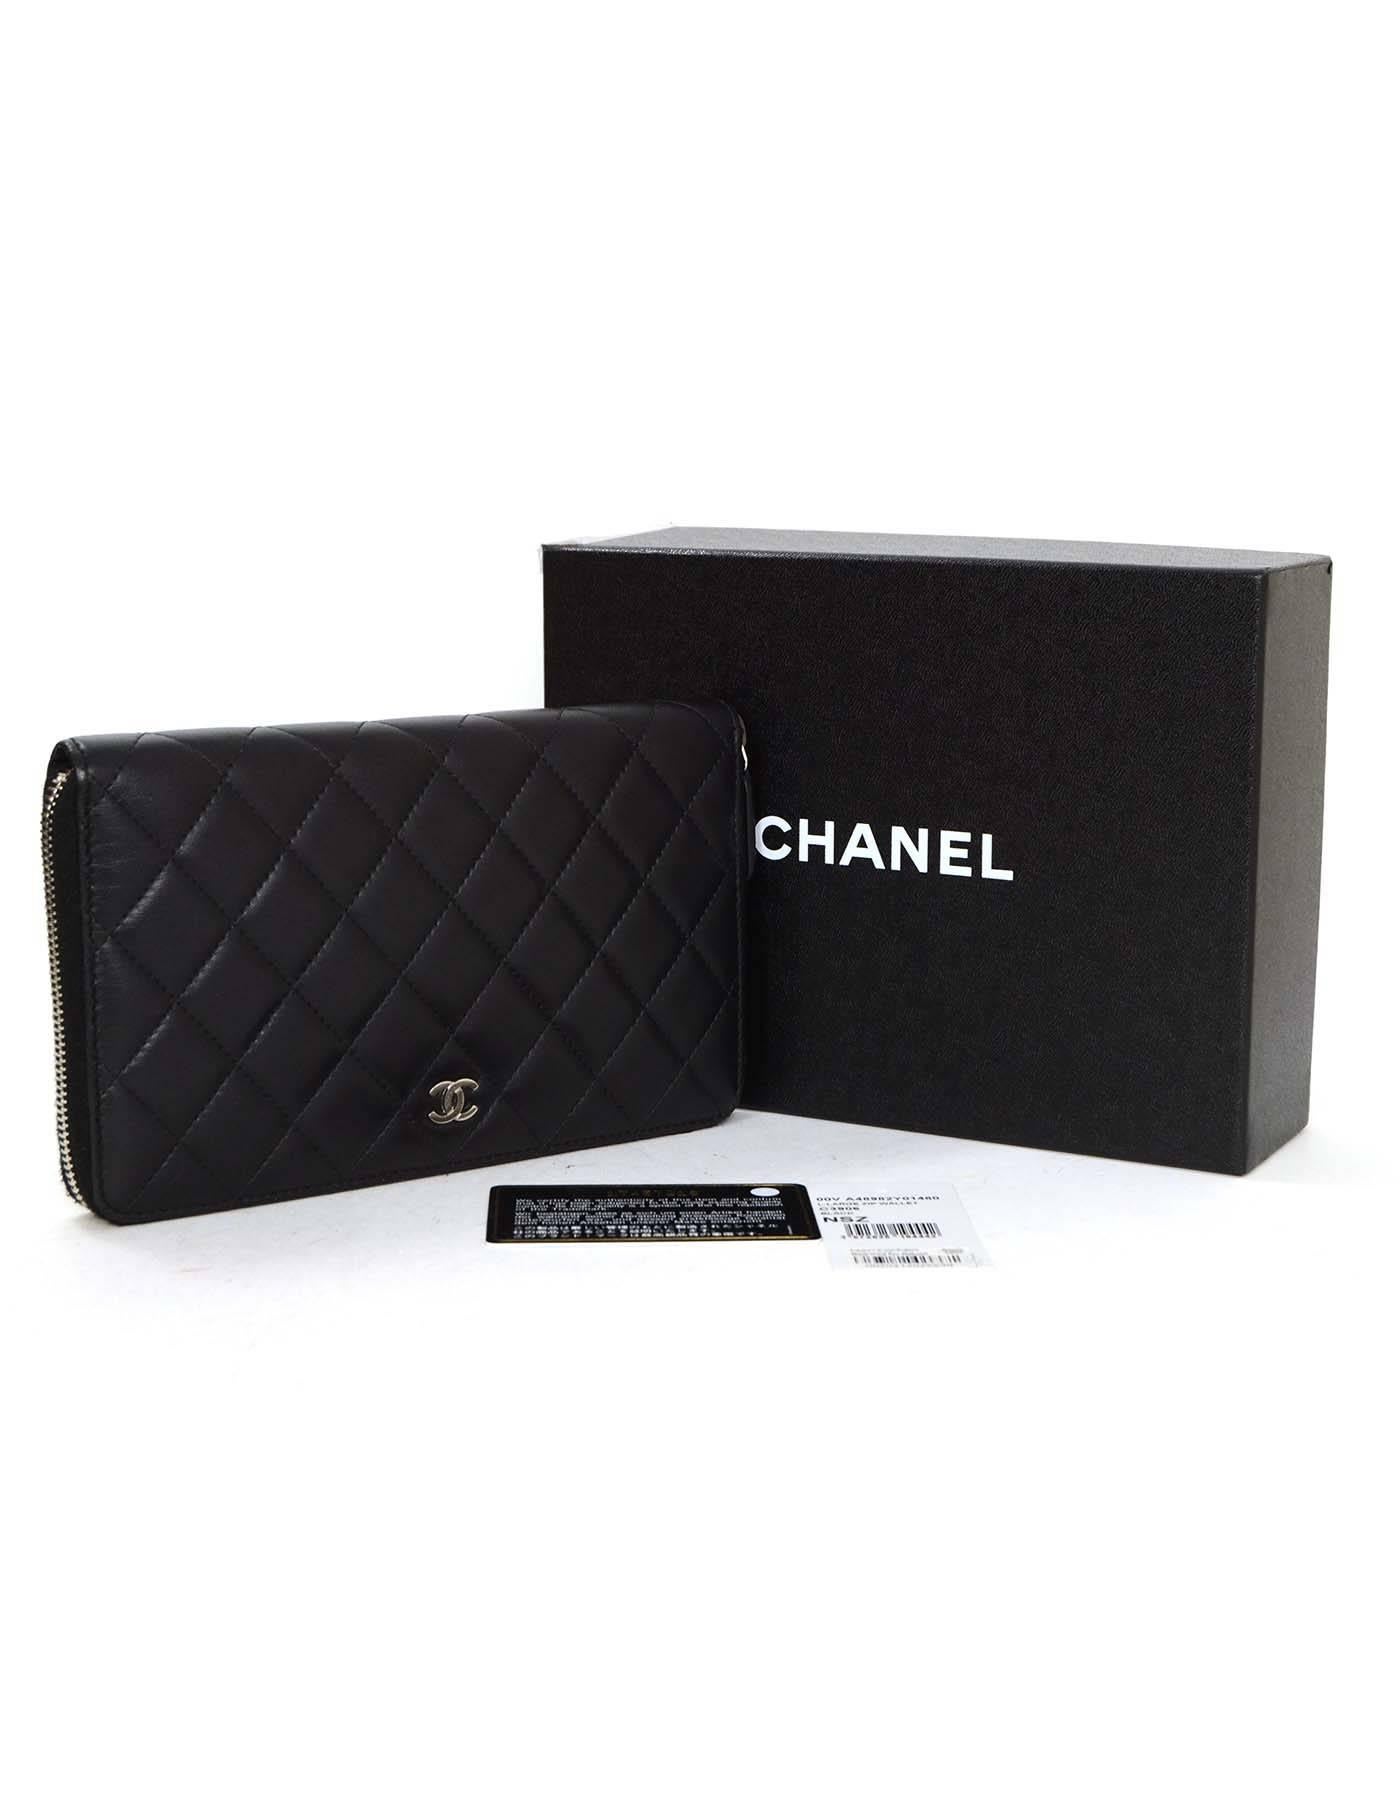 Chanel Black Lambskin Quilted Large Zip Wallet SHW 6